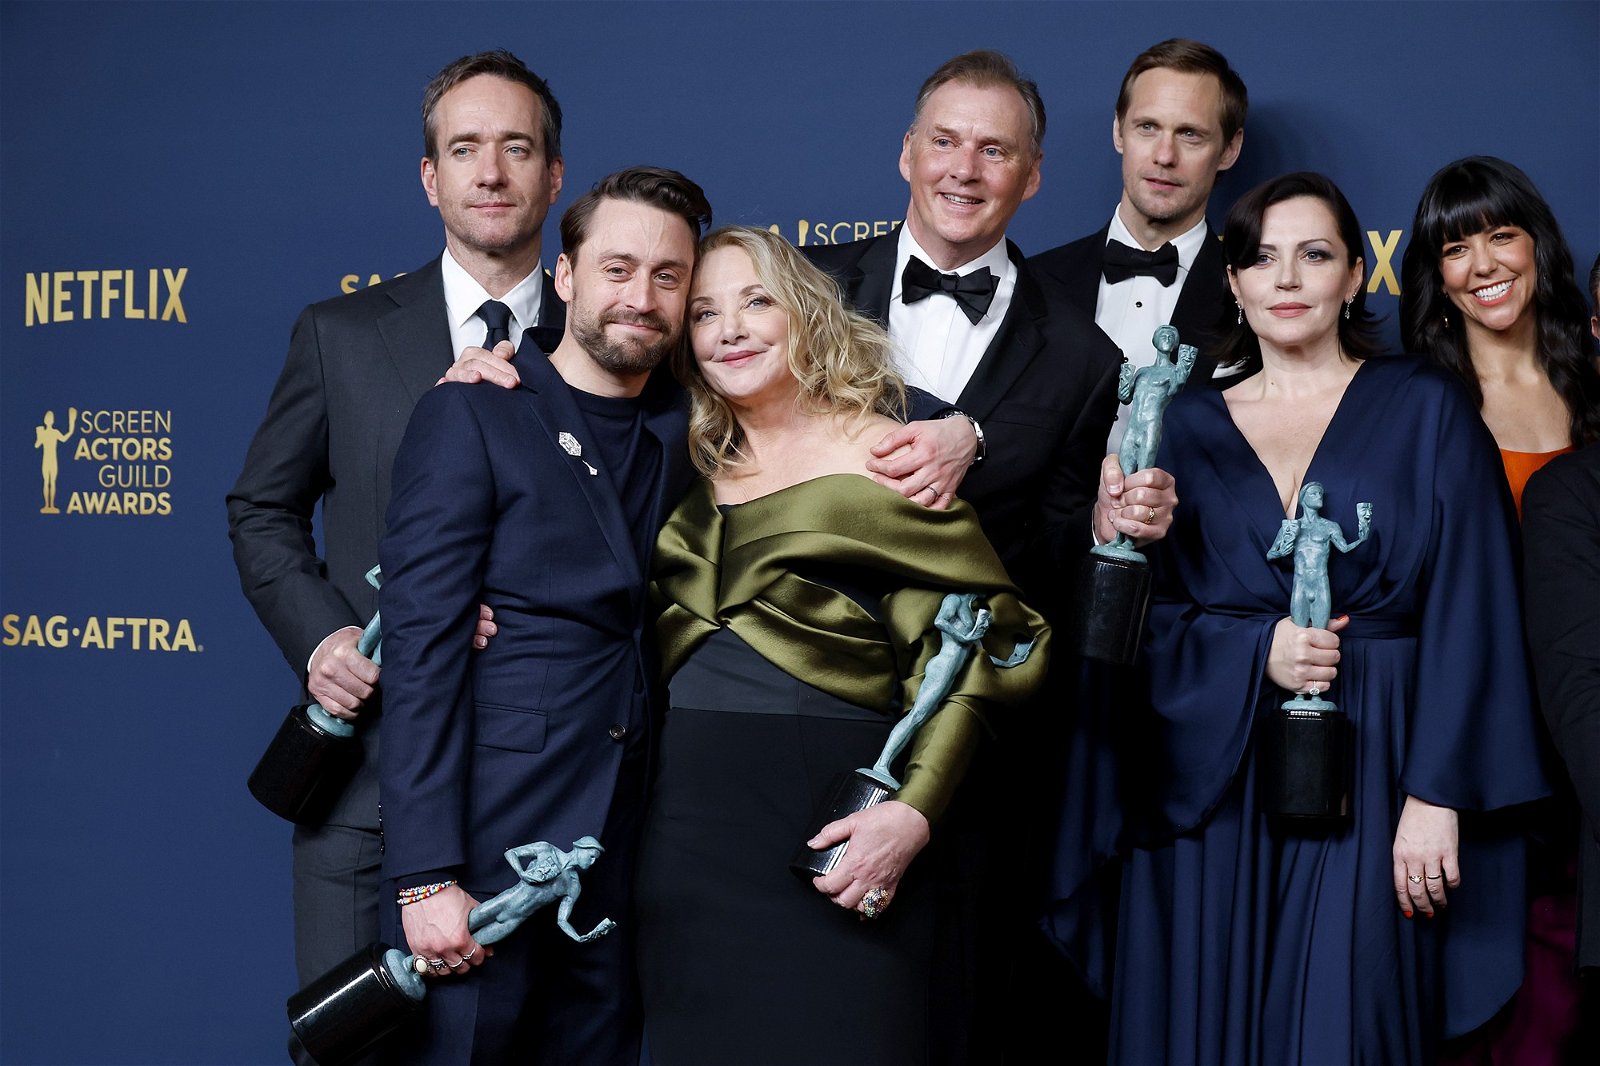 the Succession cast posing with their awards